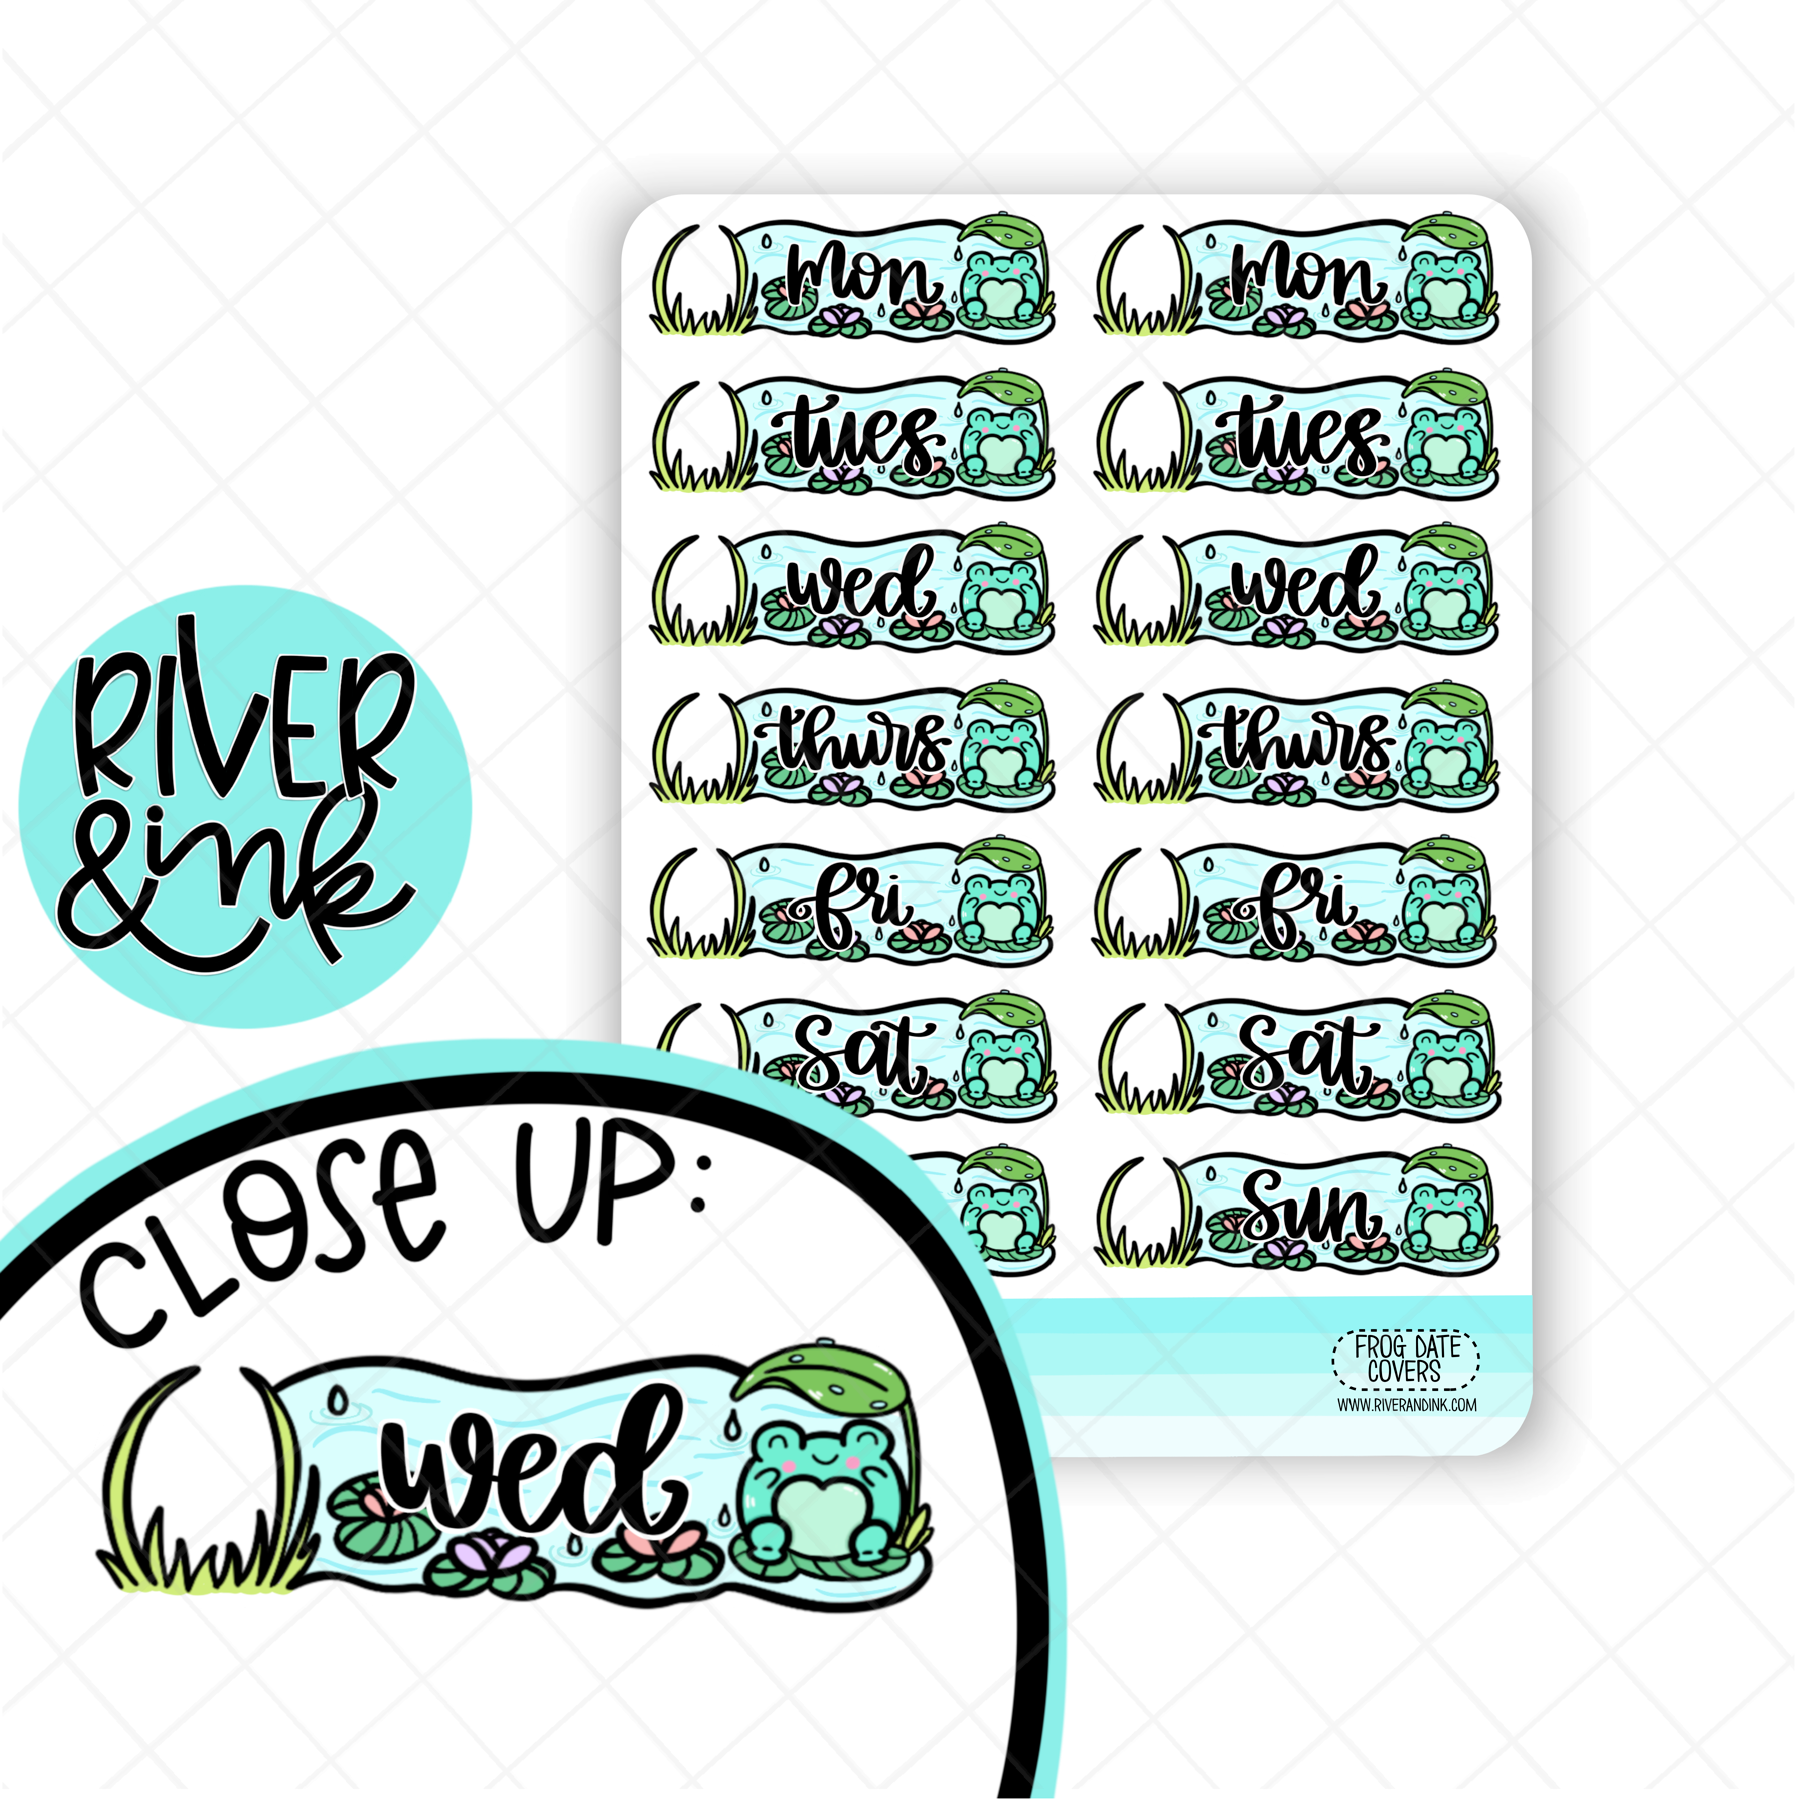 Frog Pond Date Covers | Hand Drawn Planner Stickers